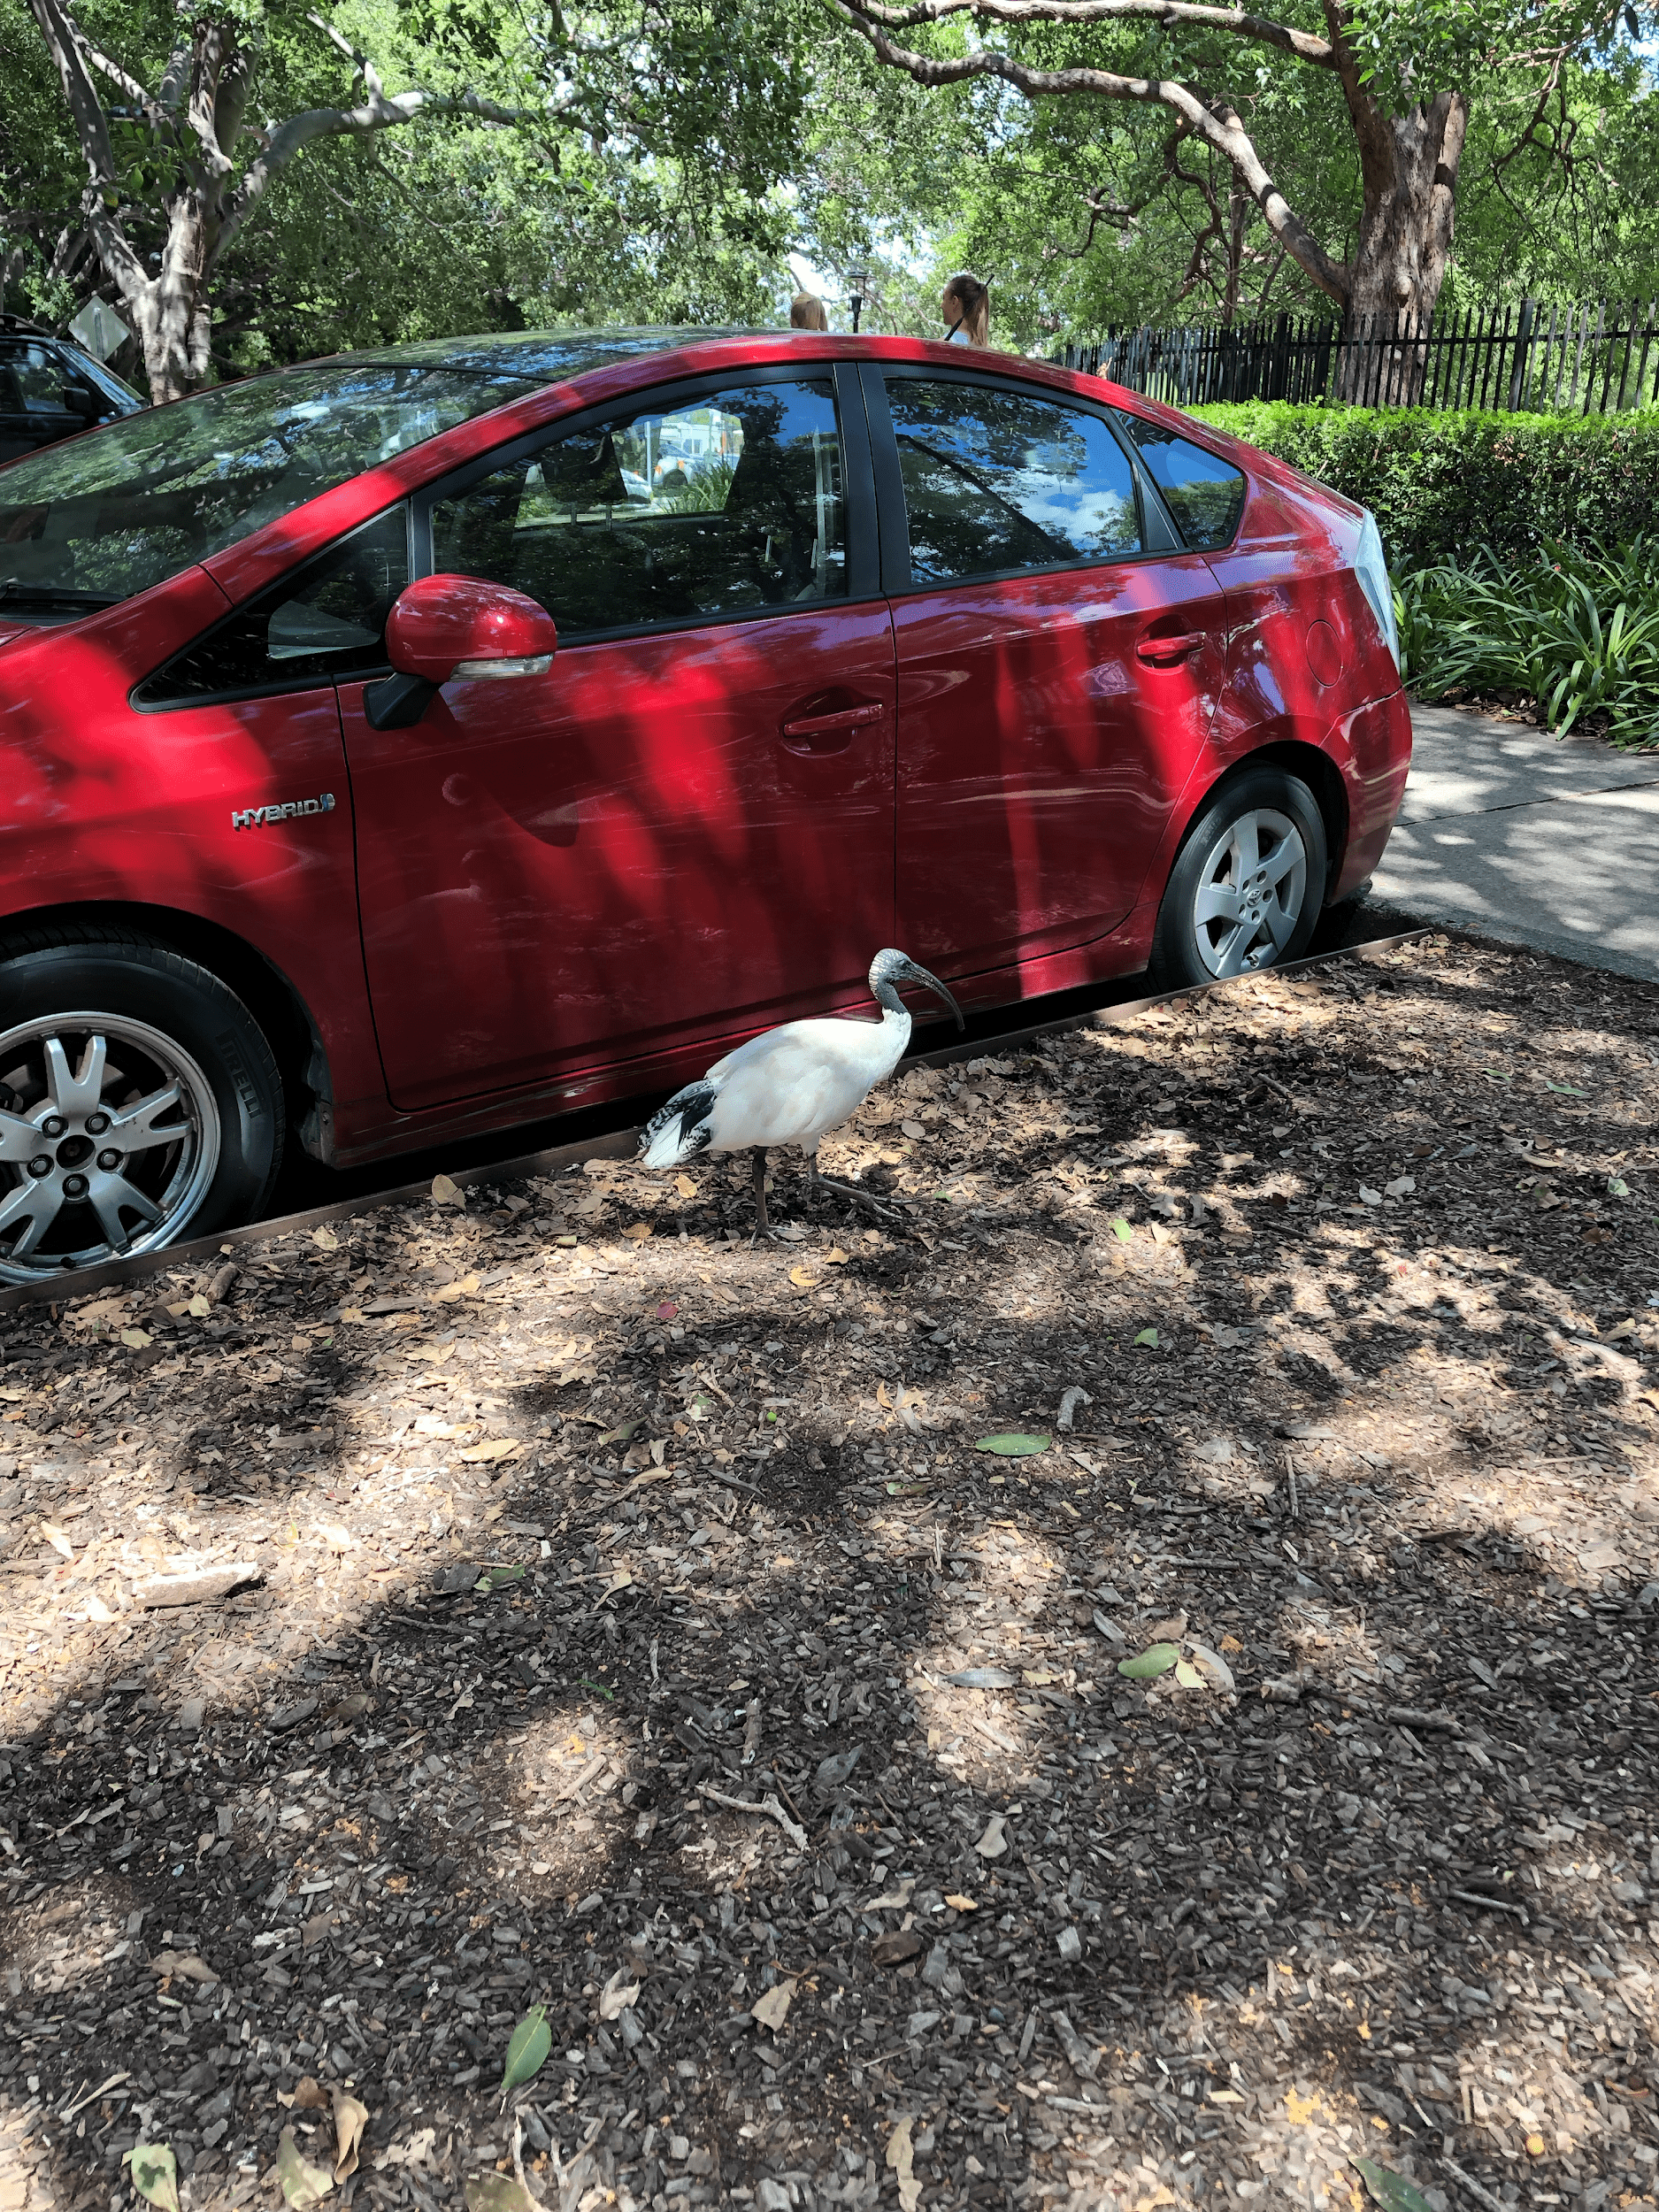 Large white Ibis bird standing in front of red car